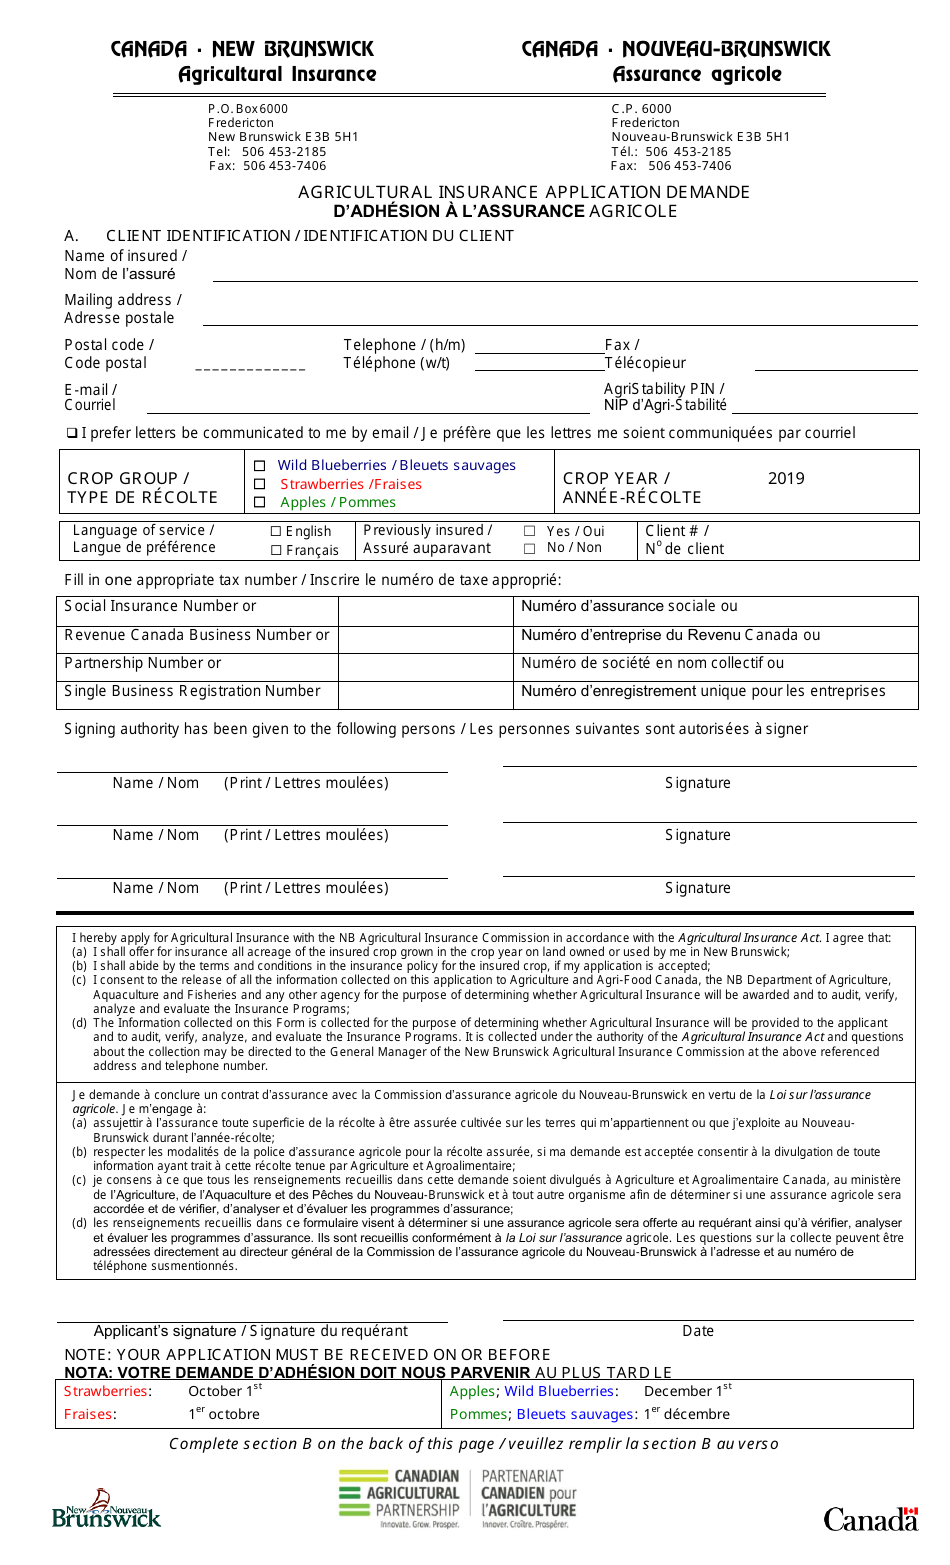 Agricultural Insurance Application Demande - Wild Blueberries / Strawberries / Apples - New Brunswick, Canada (English / French), Page 1